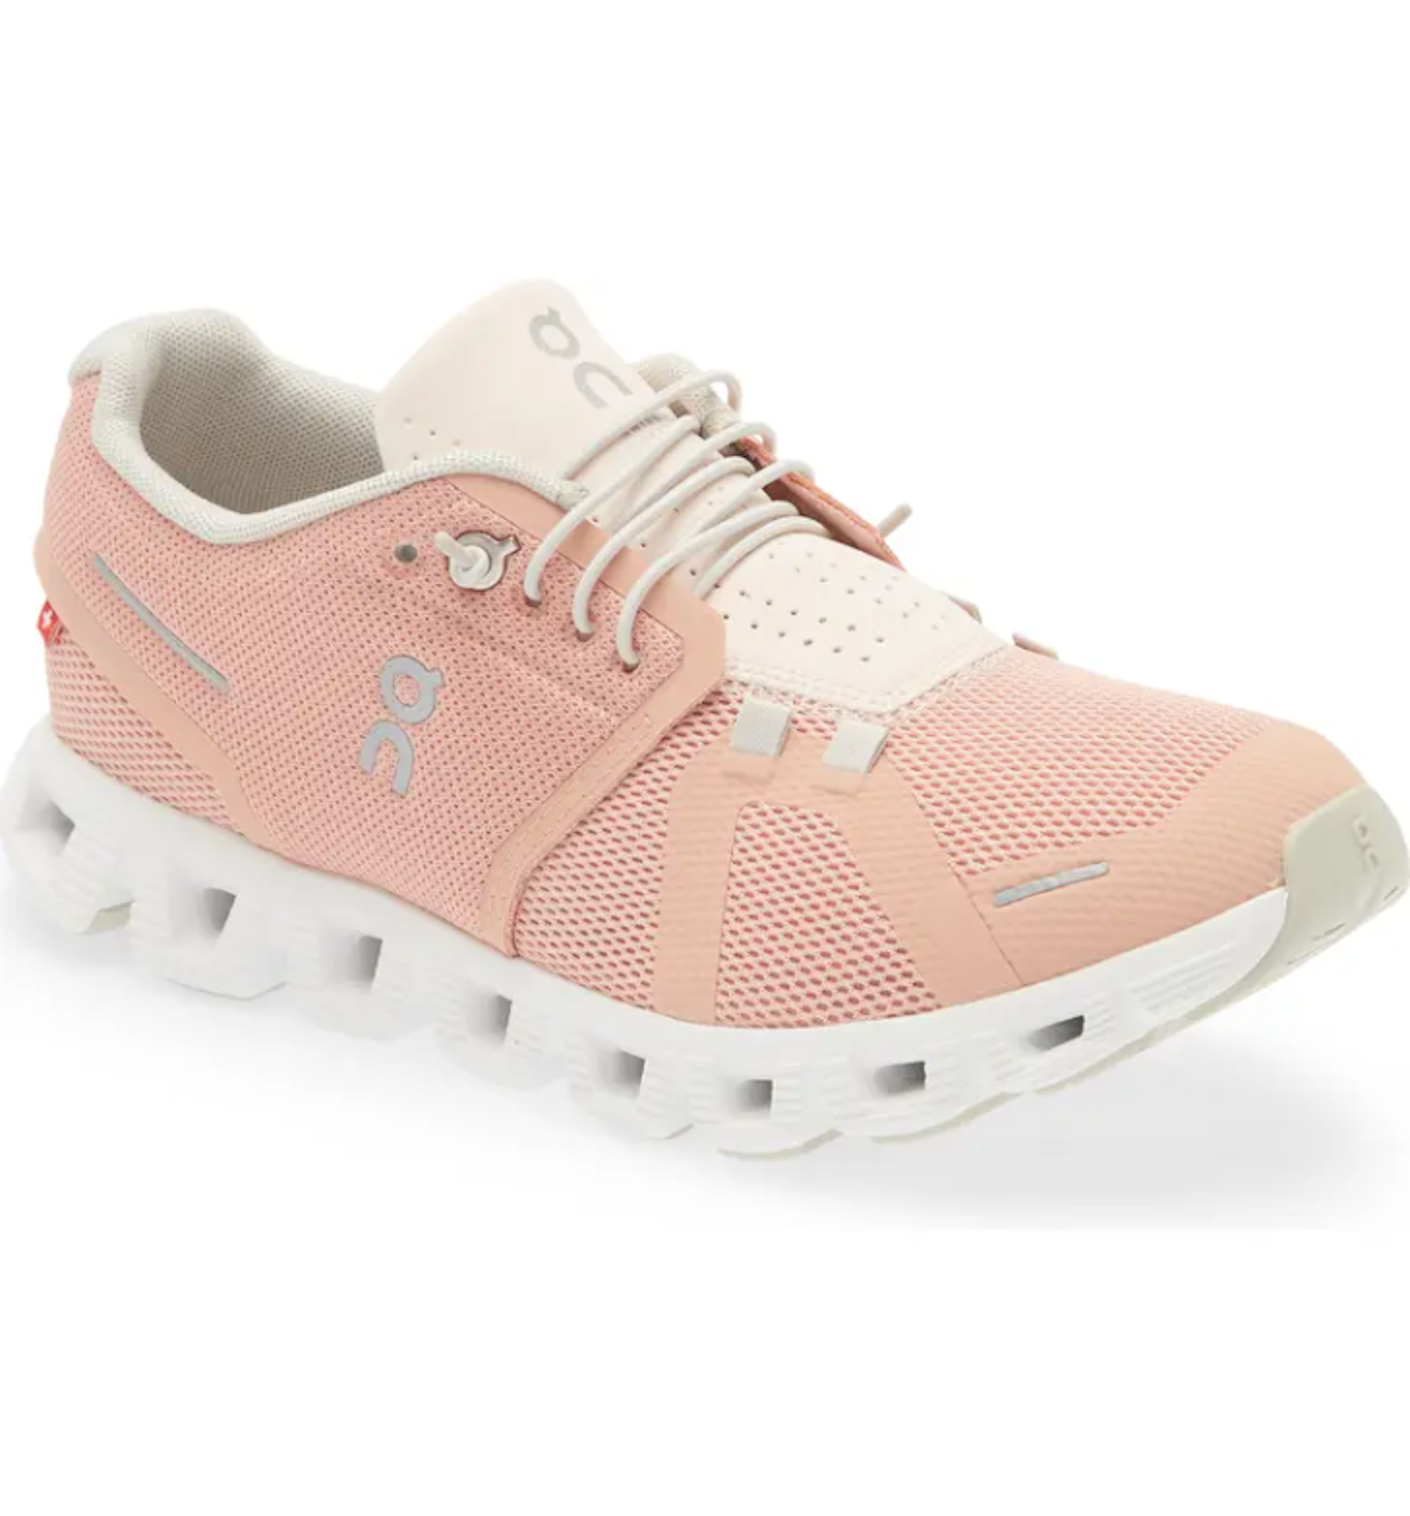 A pair of mesh pink workout shoes with white details pictured in front of a white background.